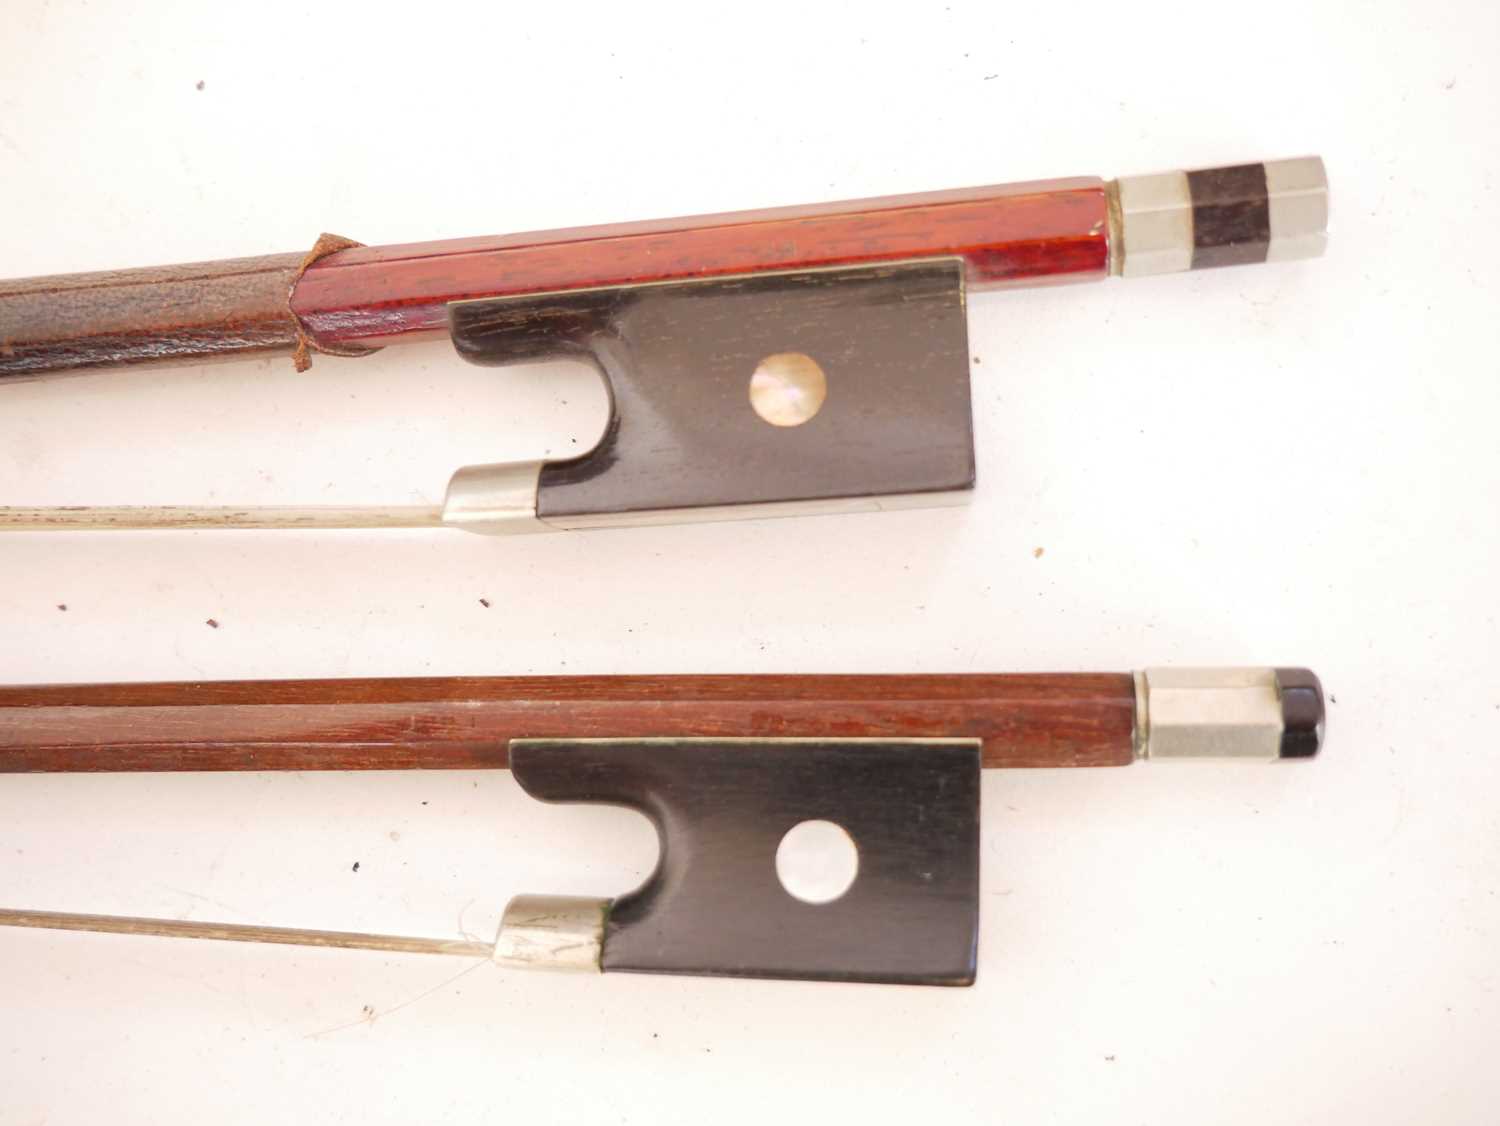 4/4 violin and a 1/2 size violin, each with a bow and case. - Image 4 of 7